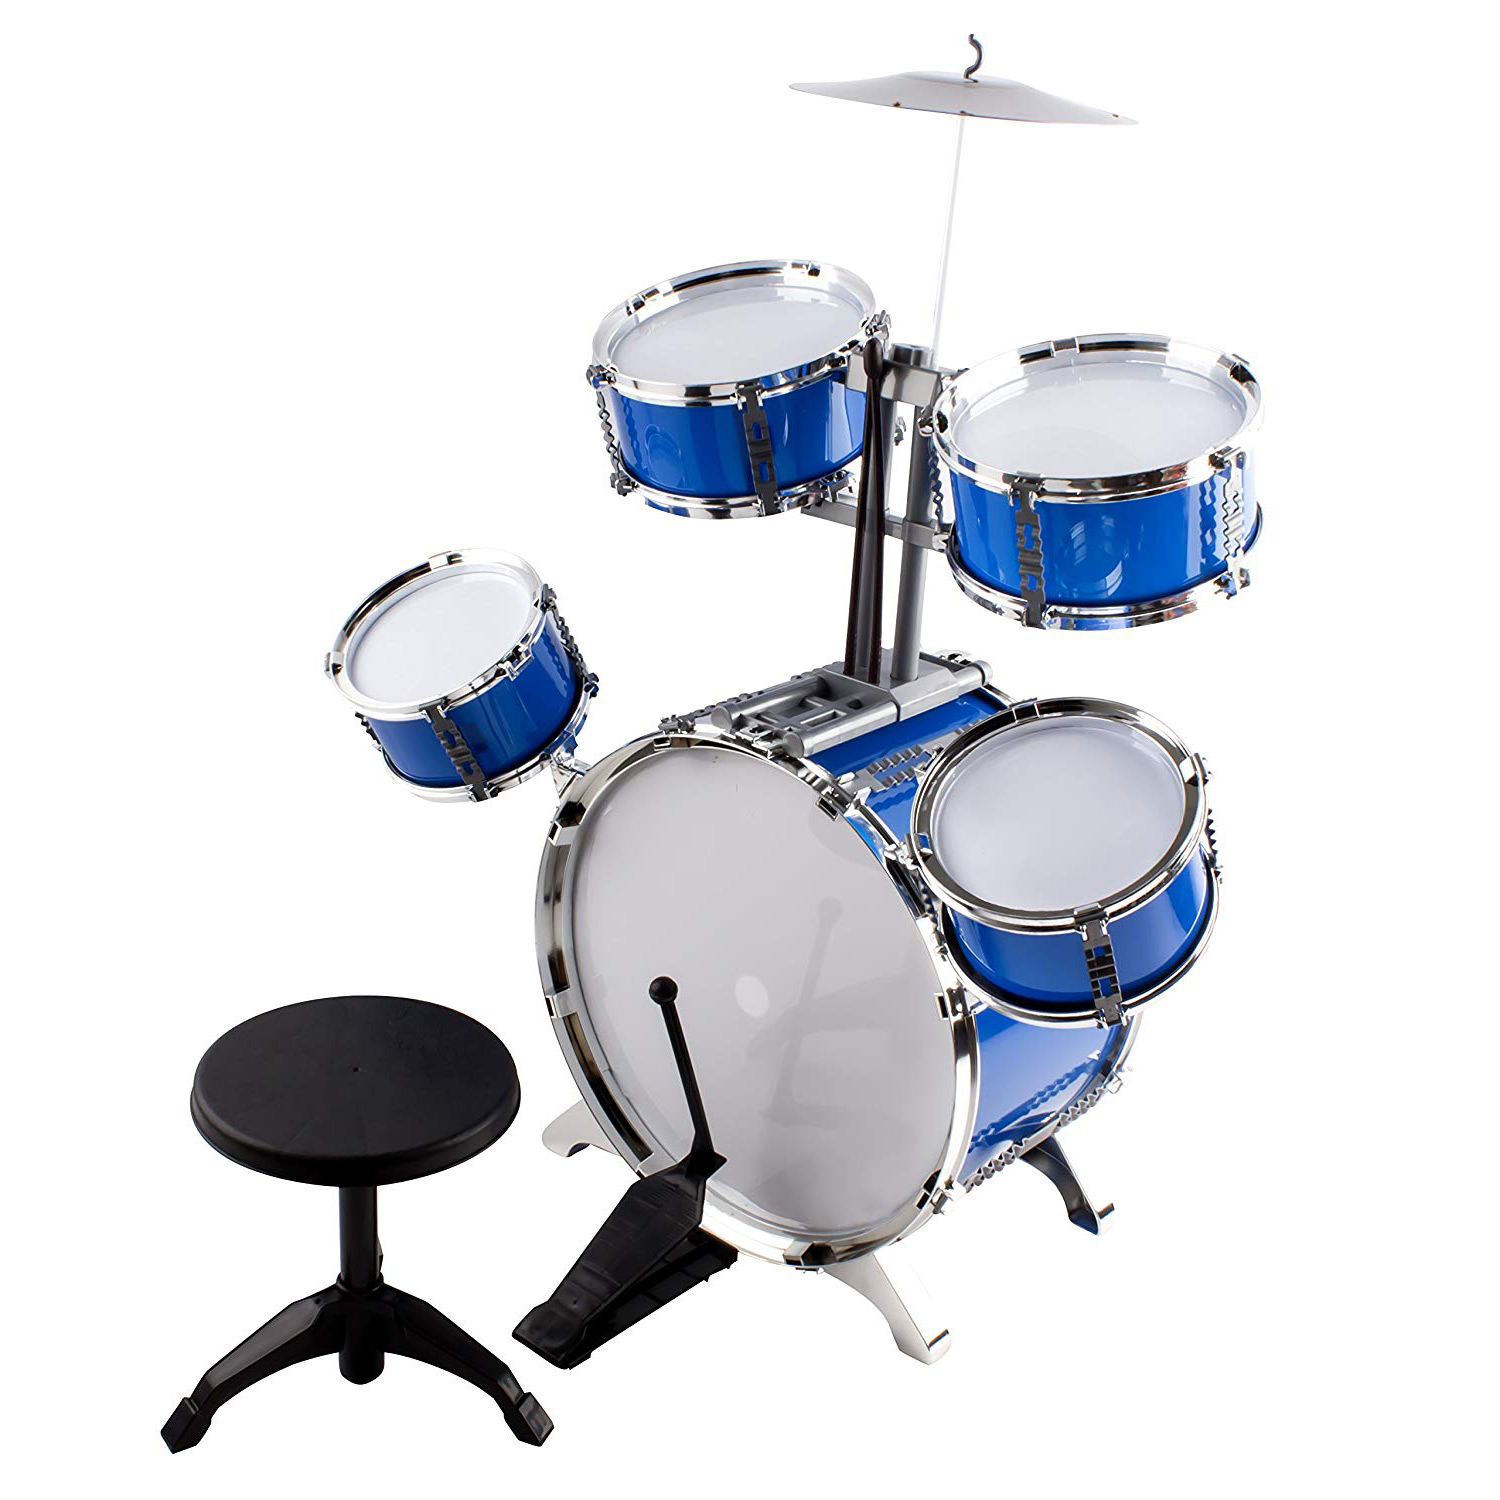 Classic Rhythm Toy Jazz Drum Big XXXL Size Children Kid's Musical Instrument Playset With 5 Drums, Cymbal, Chair, Kick Pedal, And Drumsticks A Perfect Beginner Set For Kids (Blue) 661-885